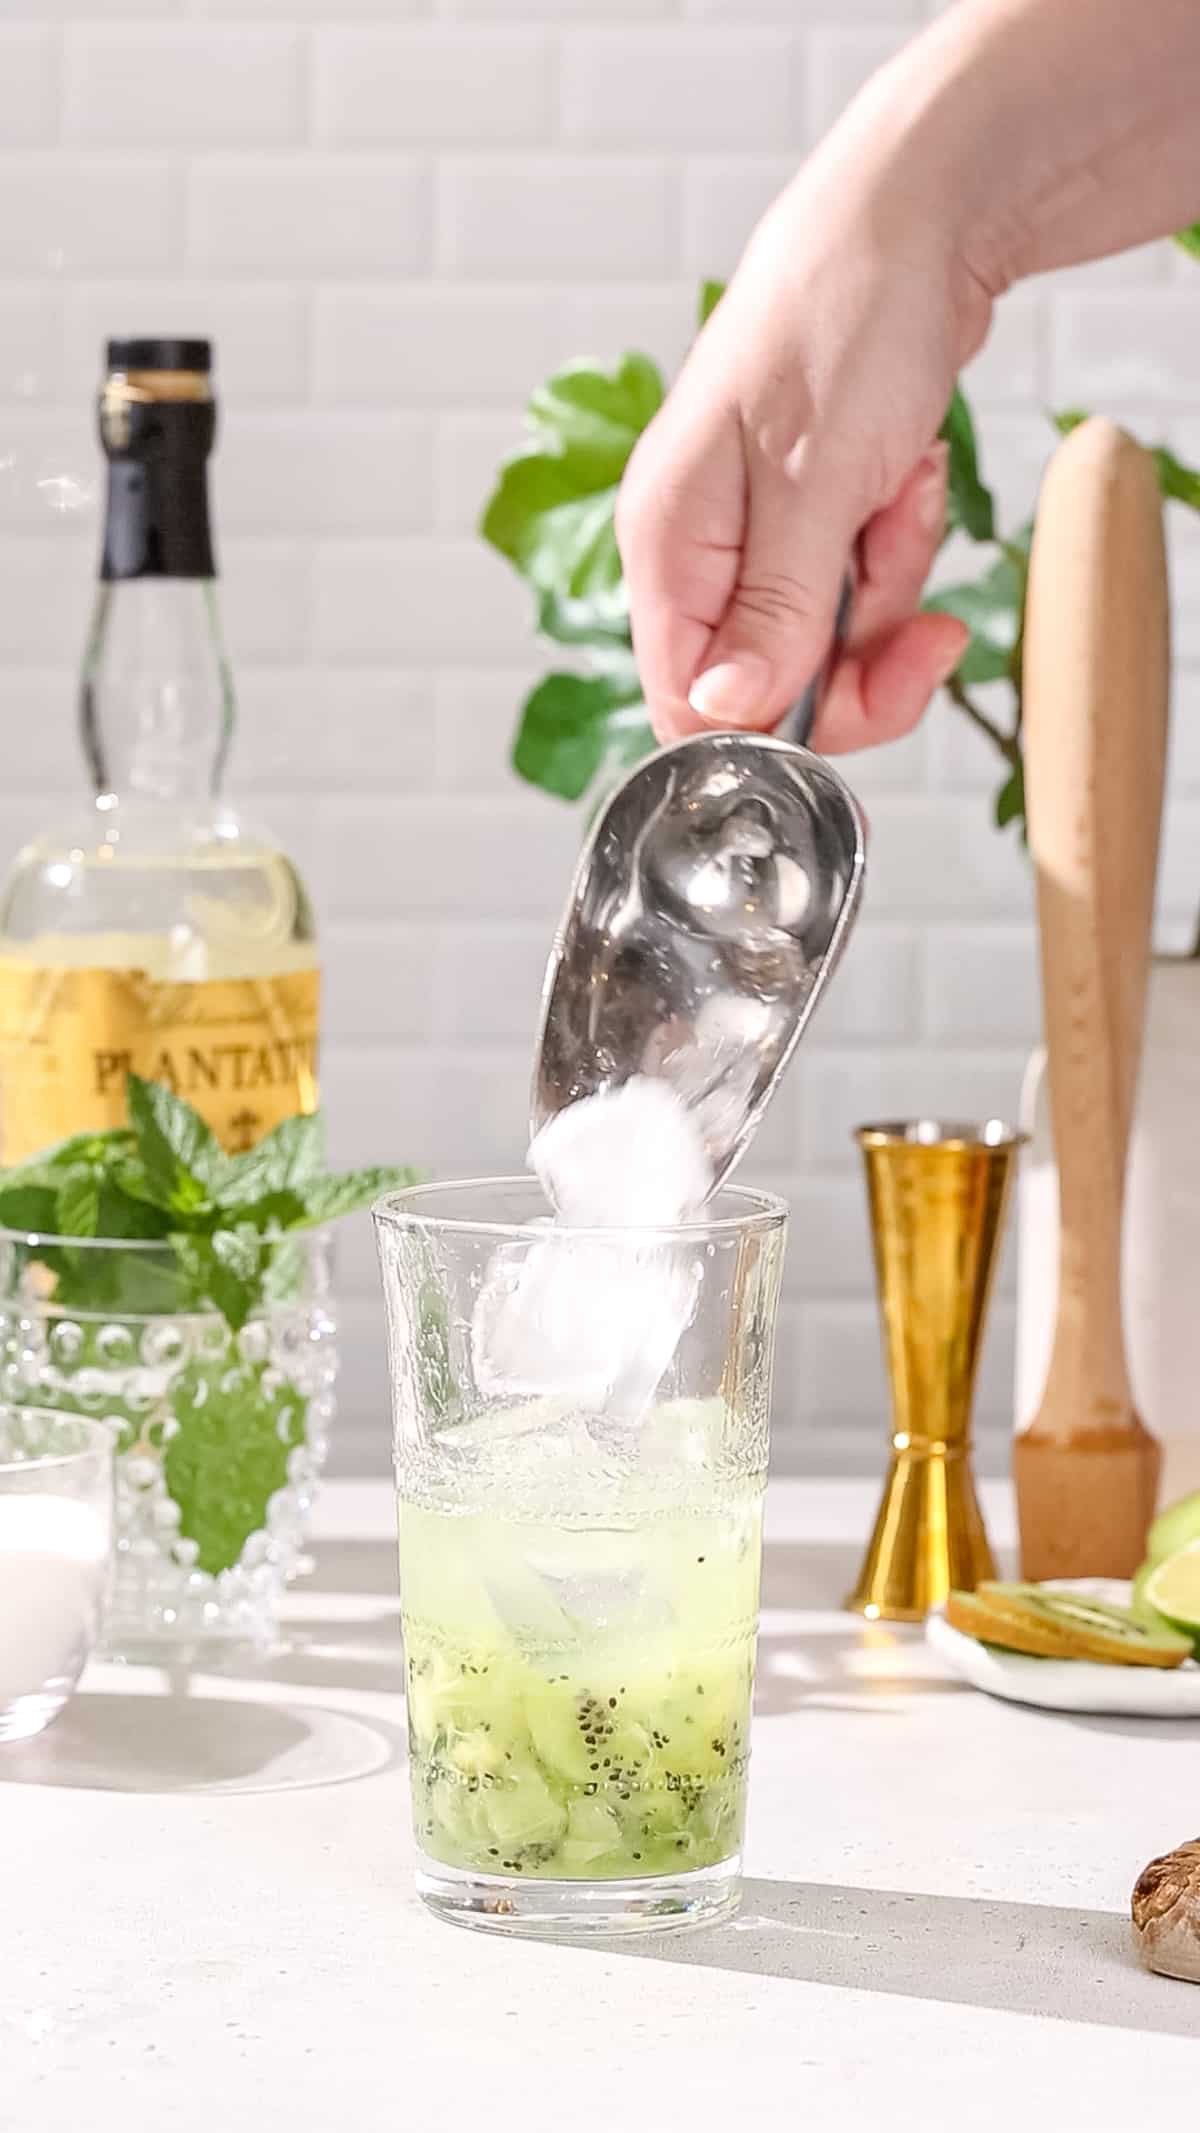 Hand using an ice scoop to add ice to a cocktail glass with kiwi and lime juice and rum in it.